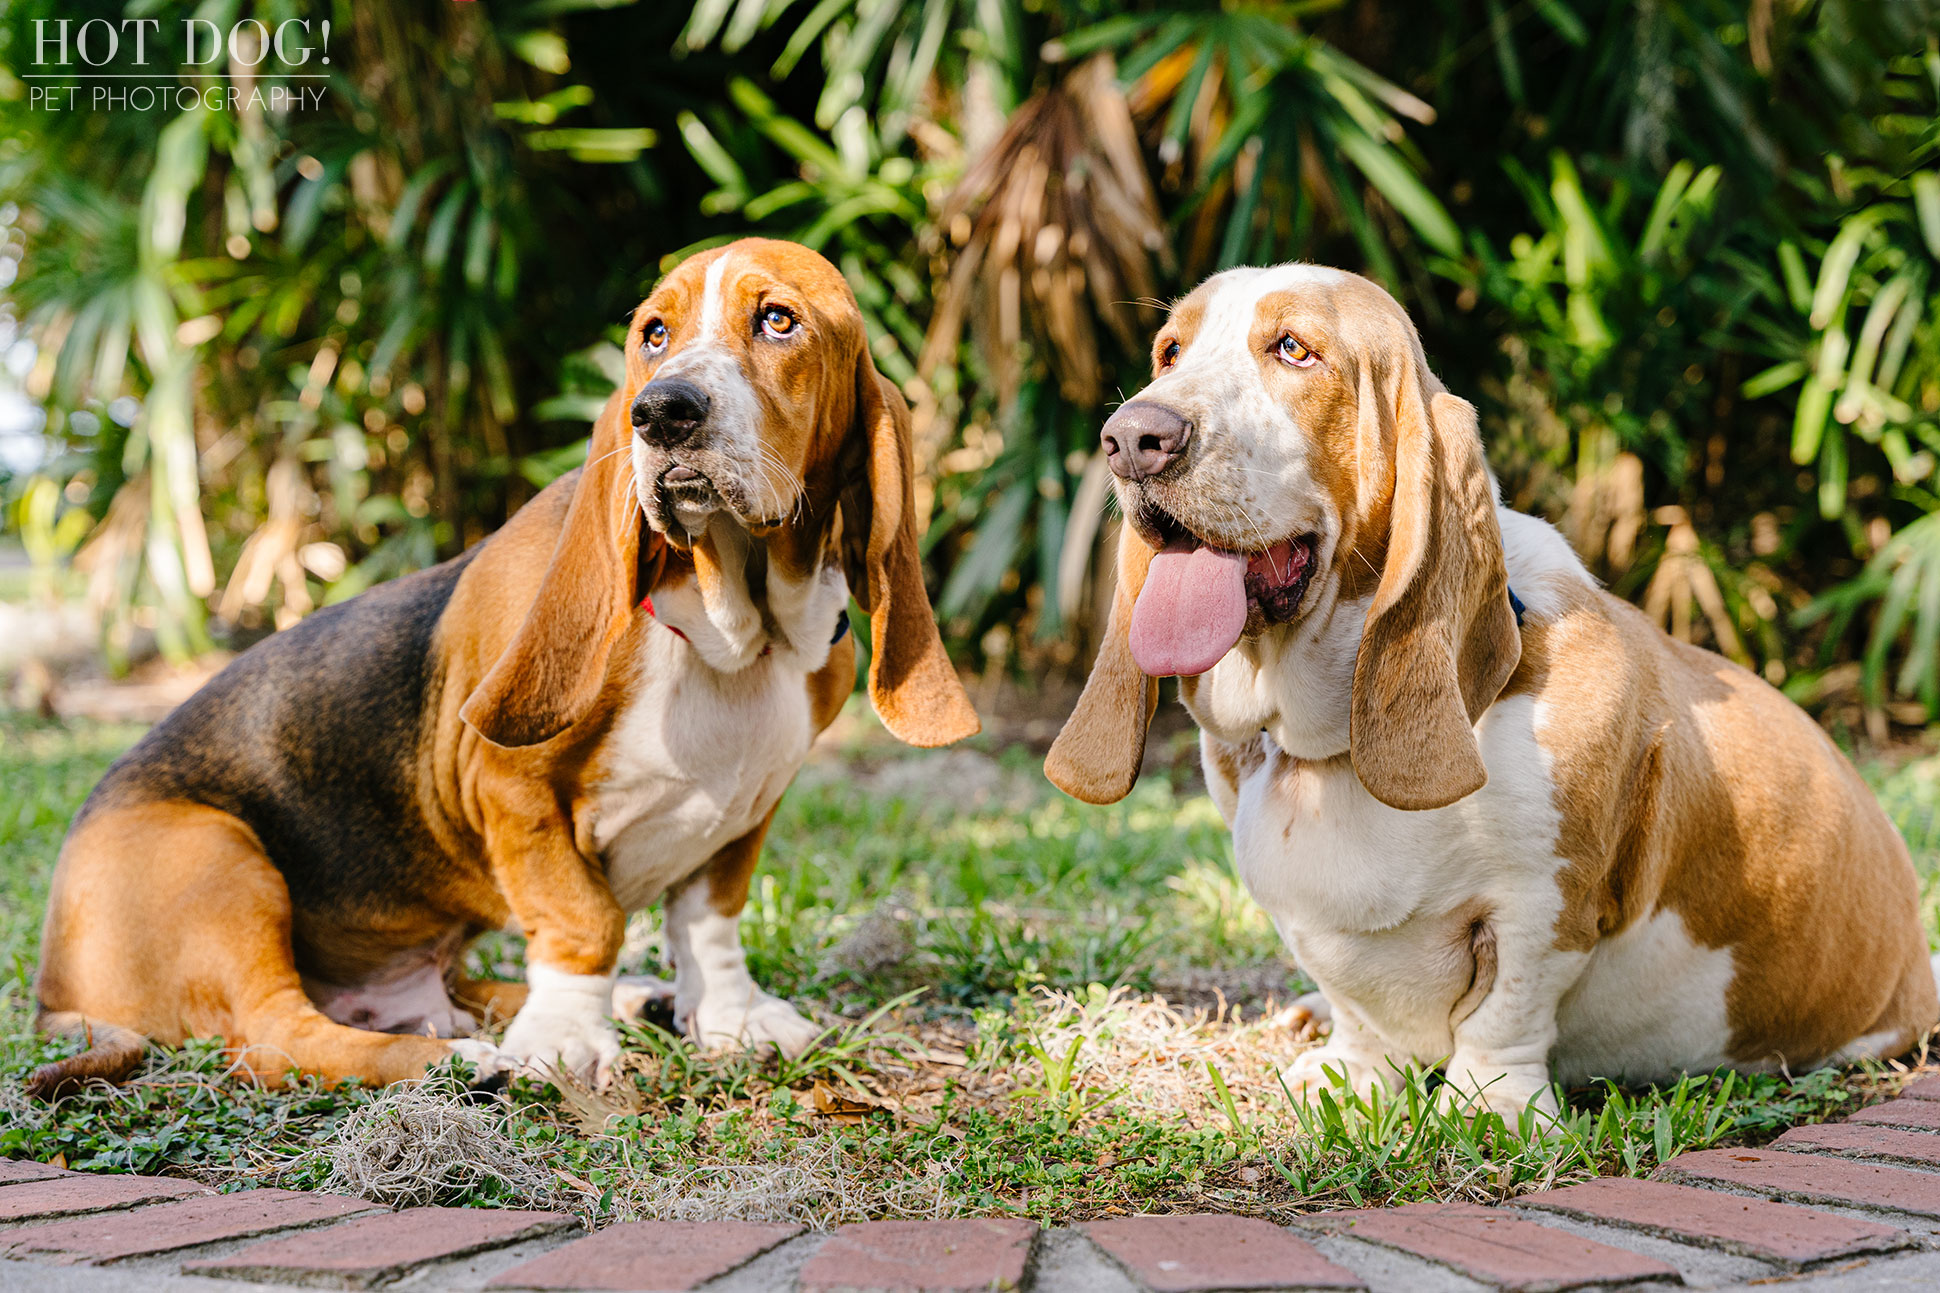 A professional pet portrait of basset hounds in Orlando, Florida by Tom and Erika Pitera of Hot Dog! Pet Photography.